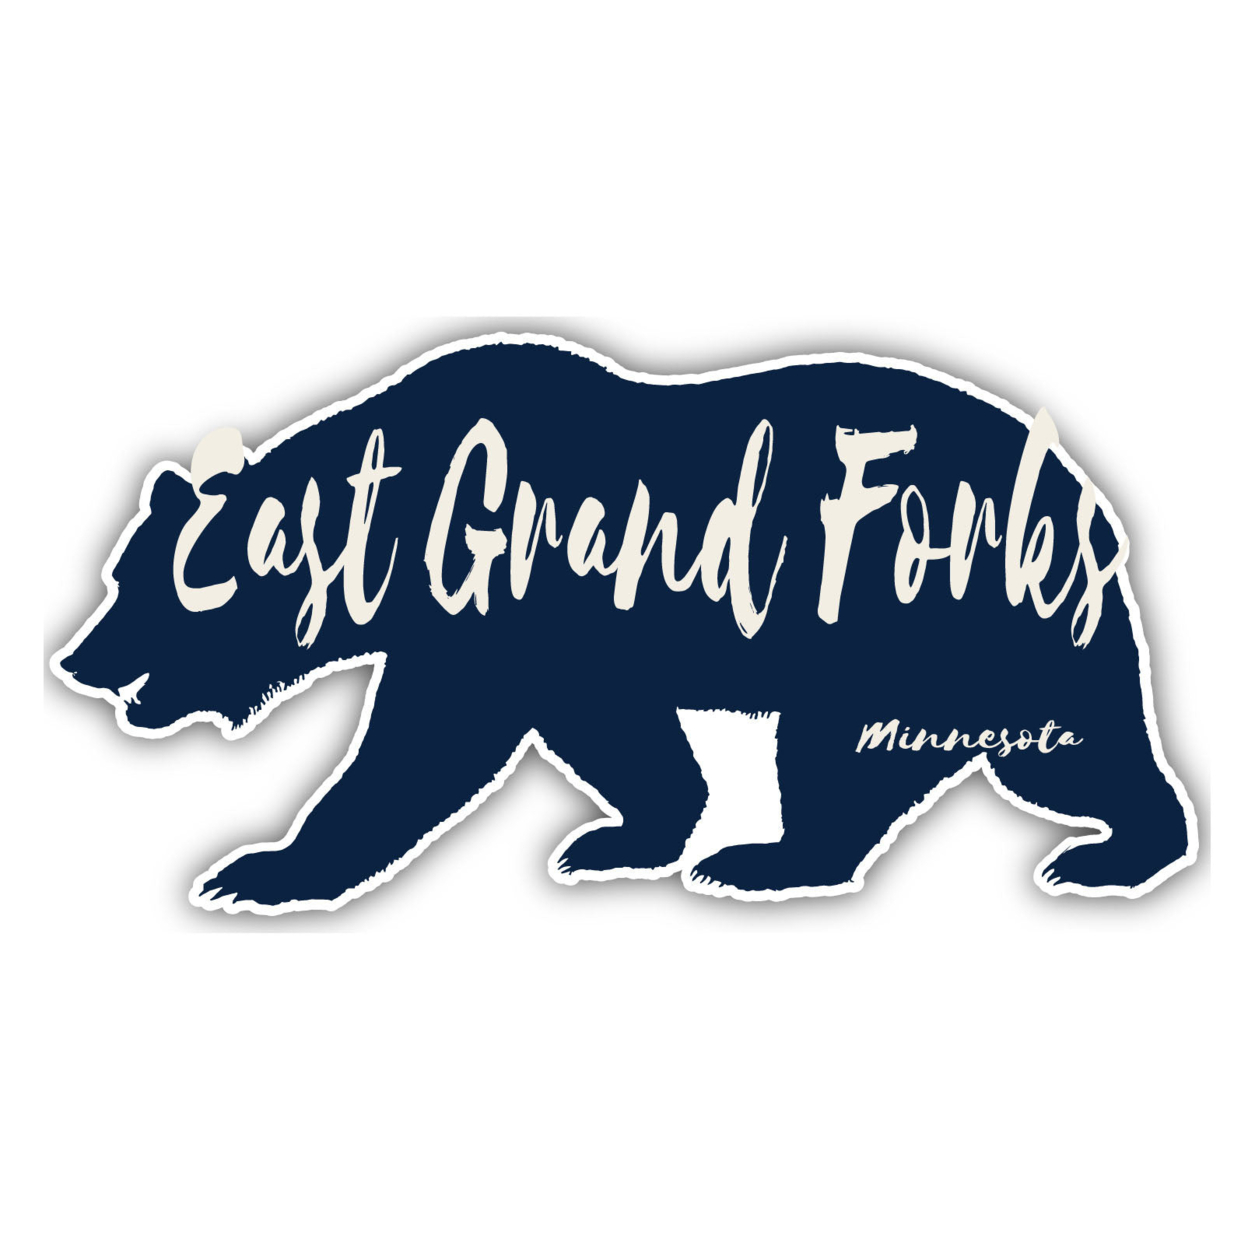 East Grand Forks Minnesota Souvenir Decorative Stickers (Choose Theme And Size) - Single Unit, 4-Inch, Camp Life